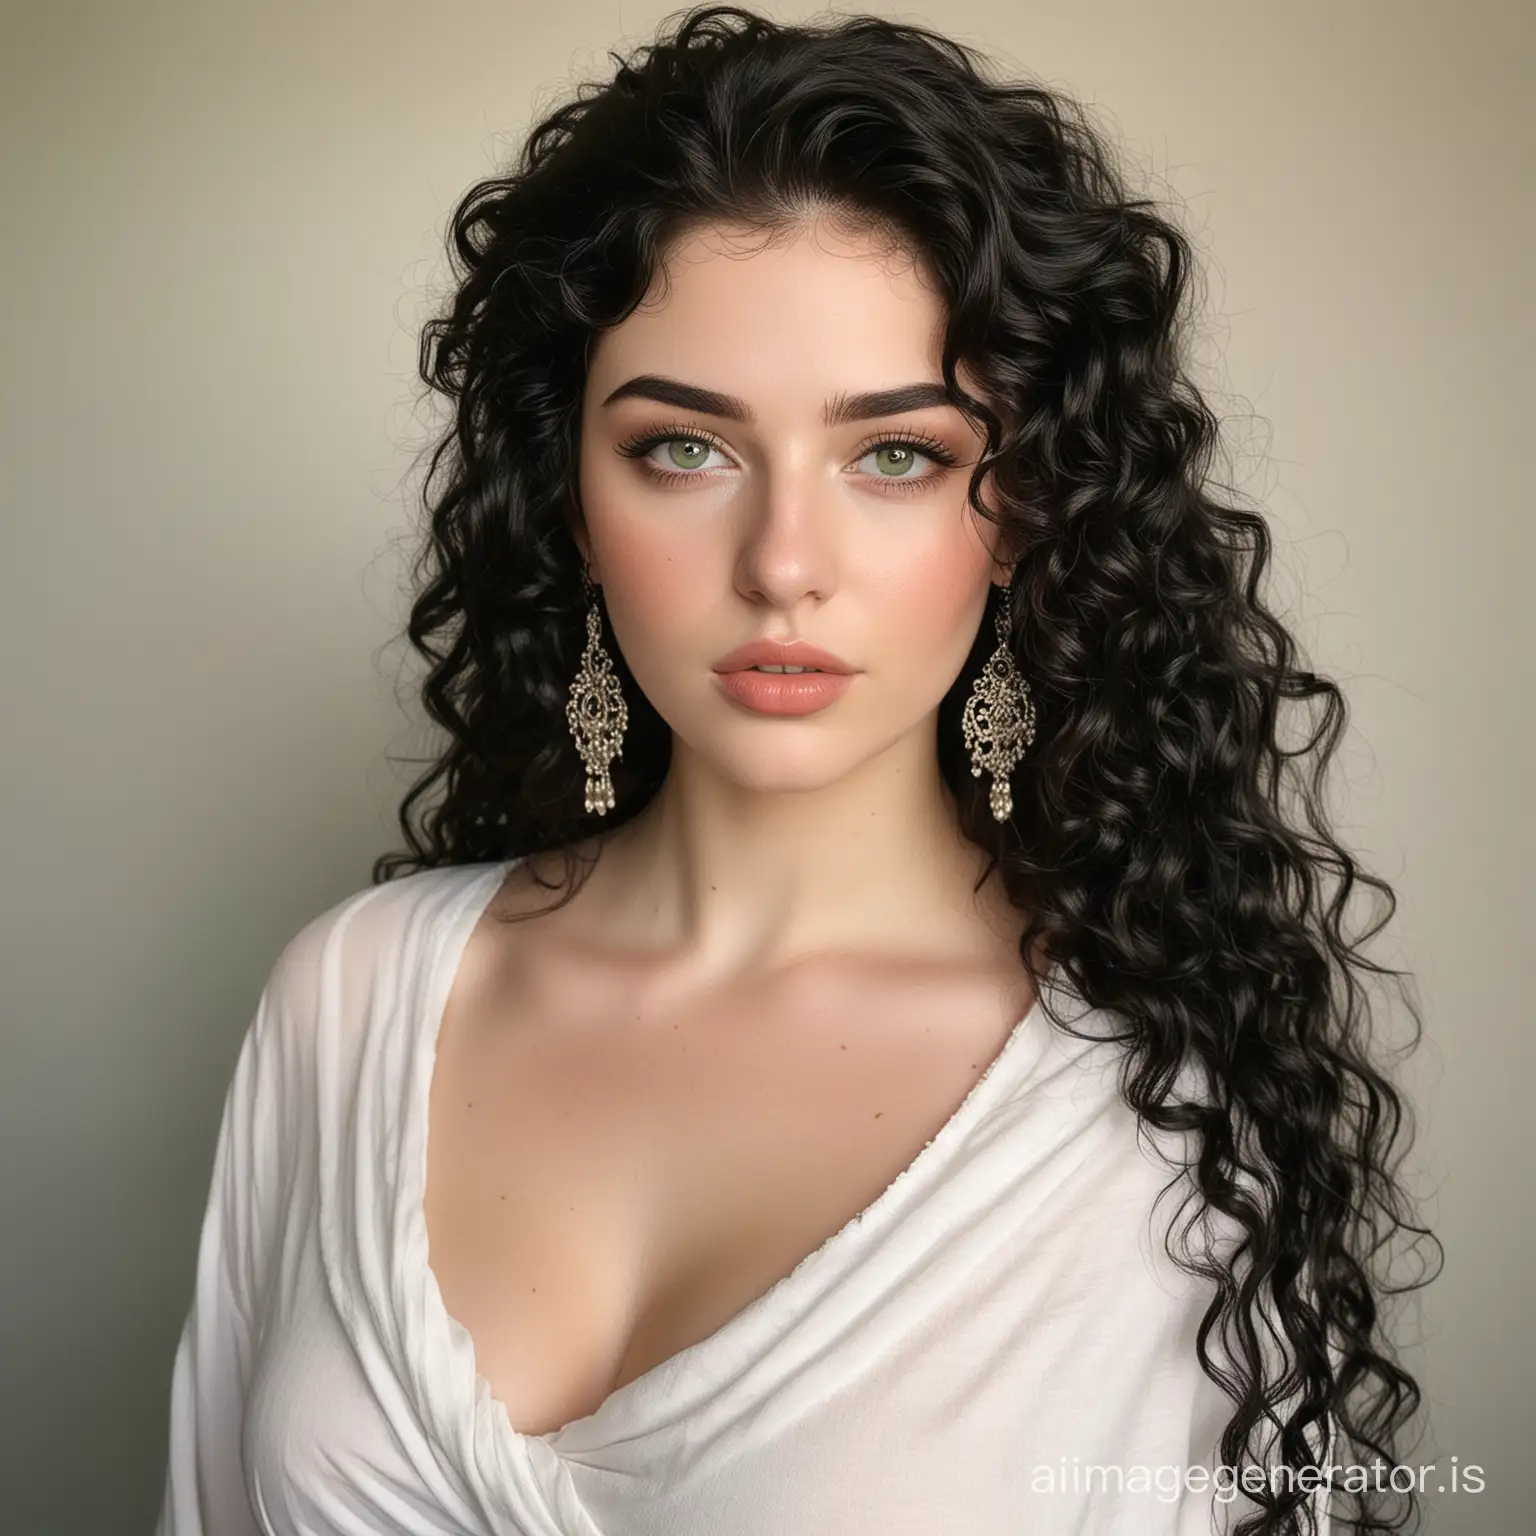 Curvy-Ancient-Greek-Goddess-with-Porcelain-Skin-and-Green-Eyes